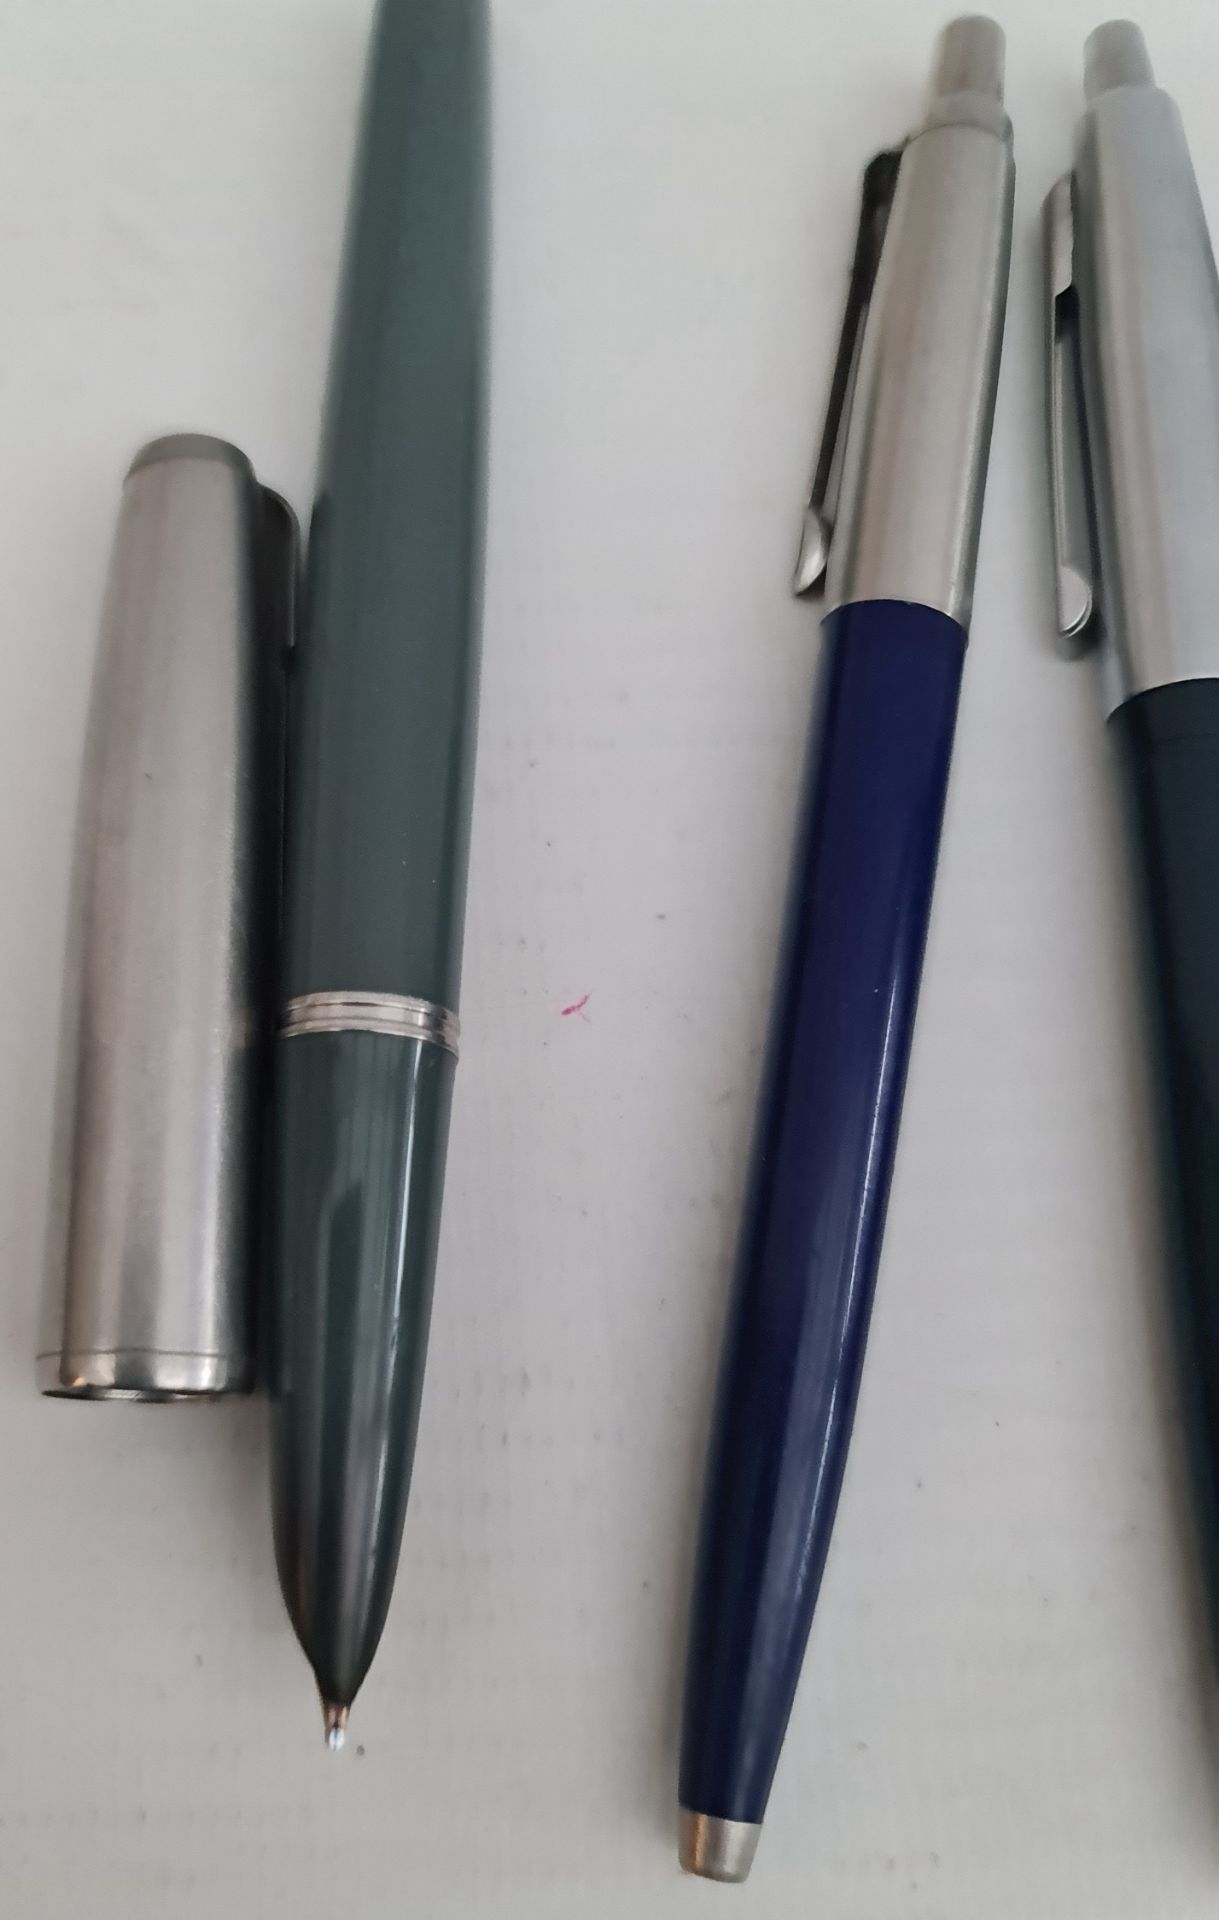 Vintage Parker Fountain Pen (similar to a 51) and 3 Parker Ball Point Pens Vintage Parker Fountain - Image 2 of 2